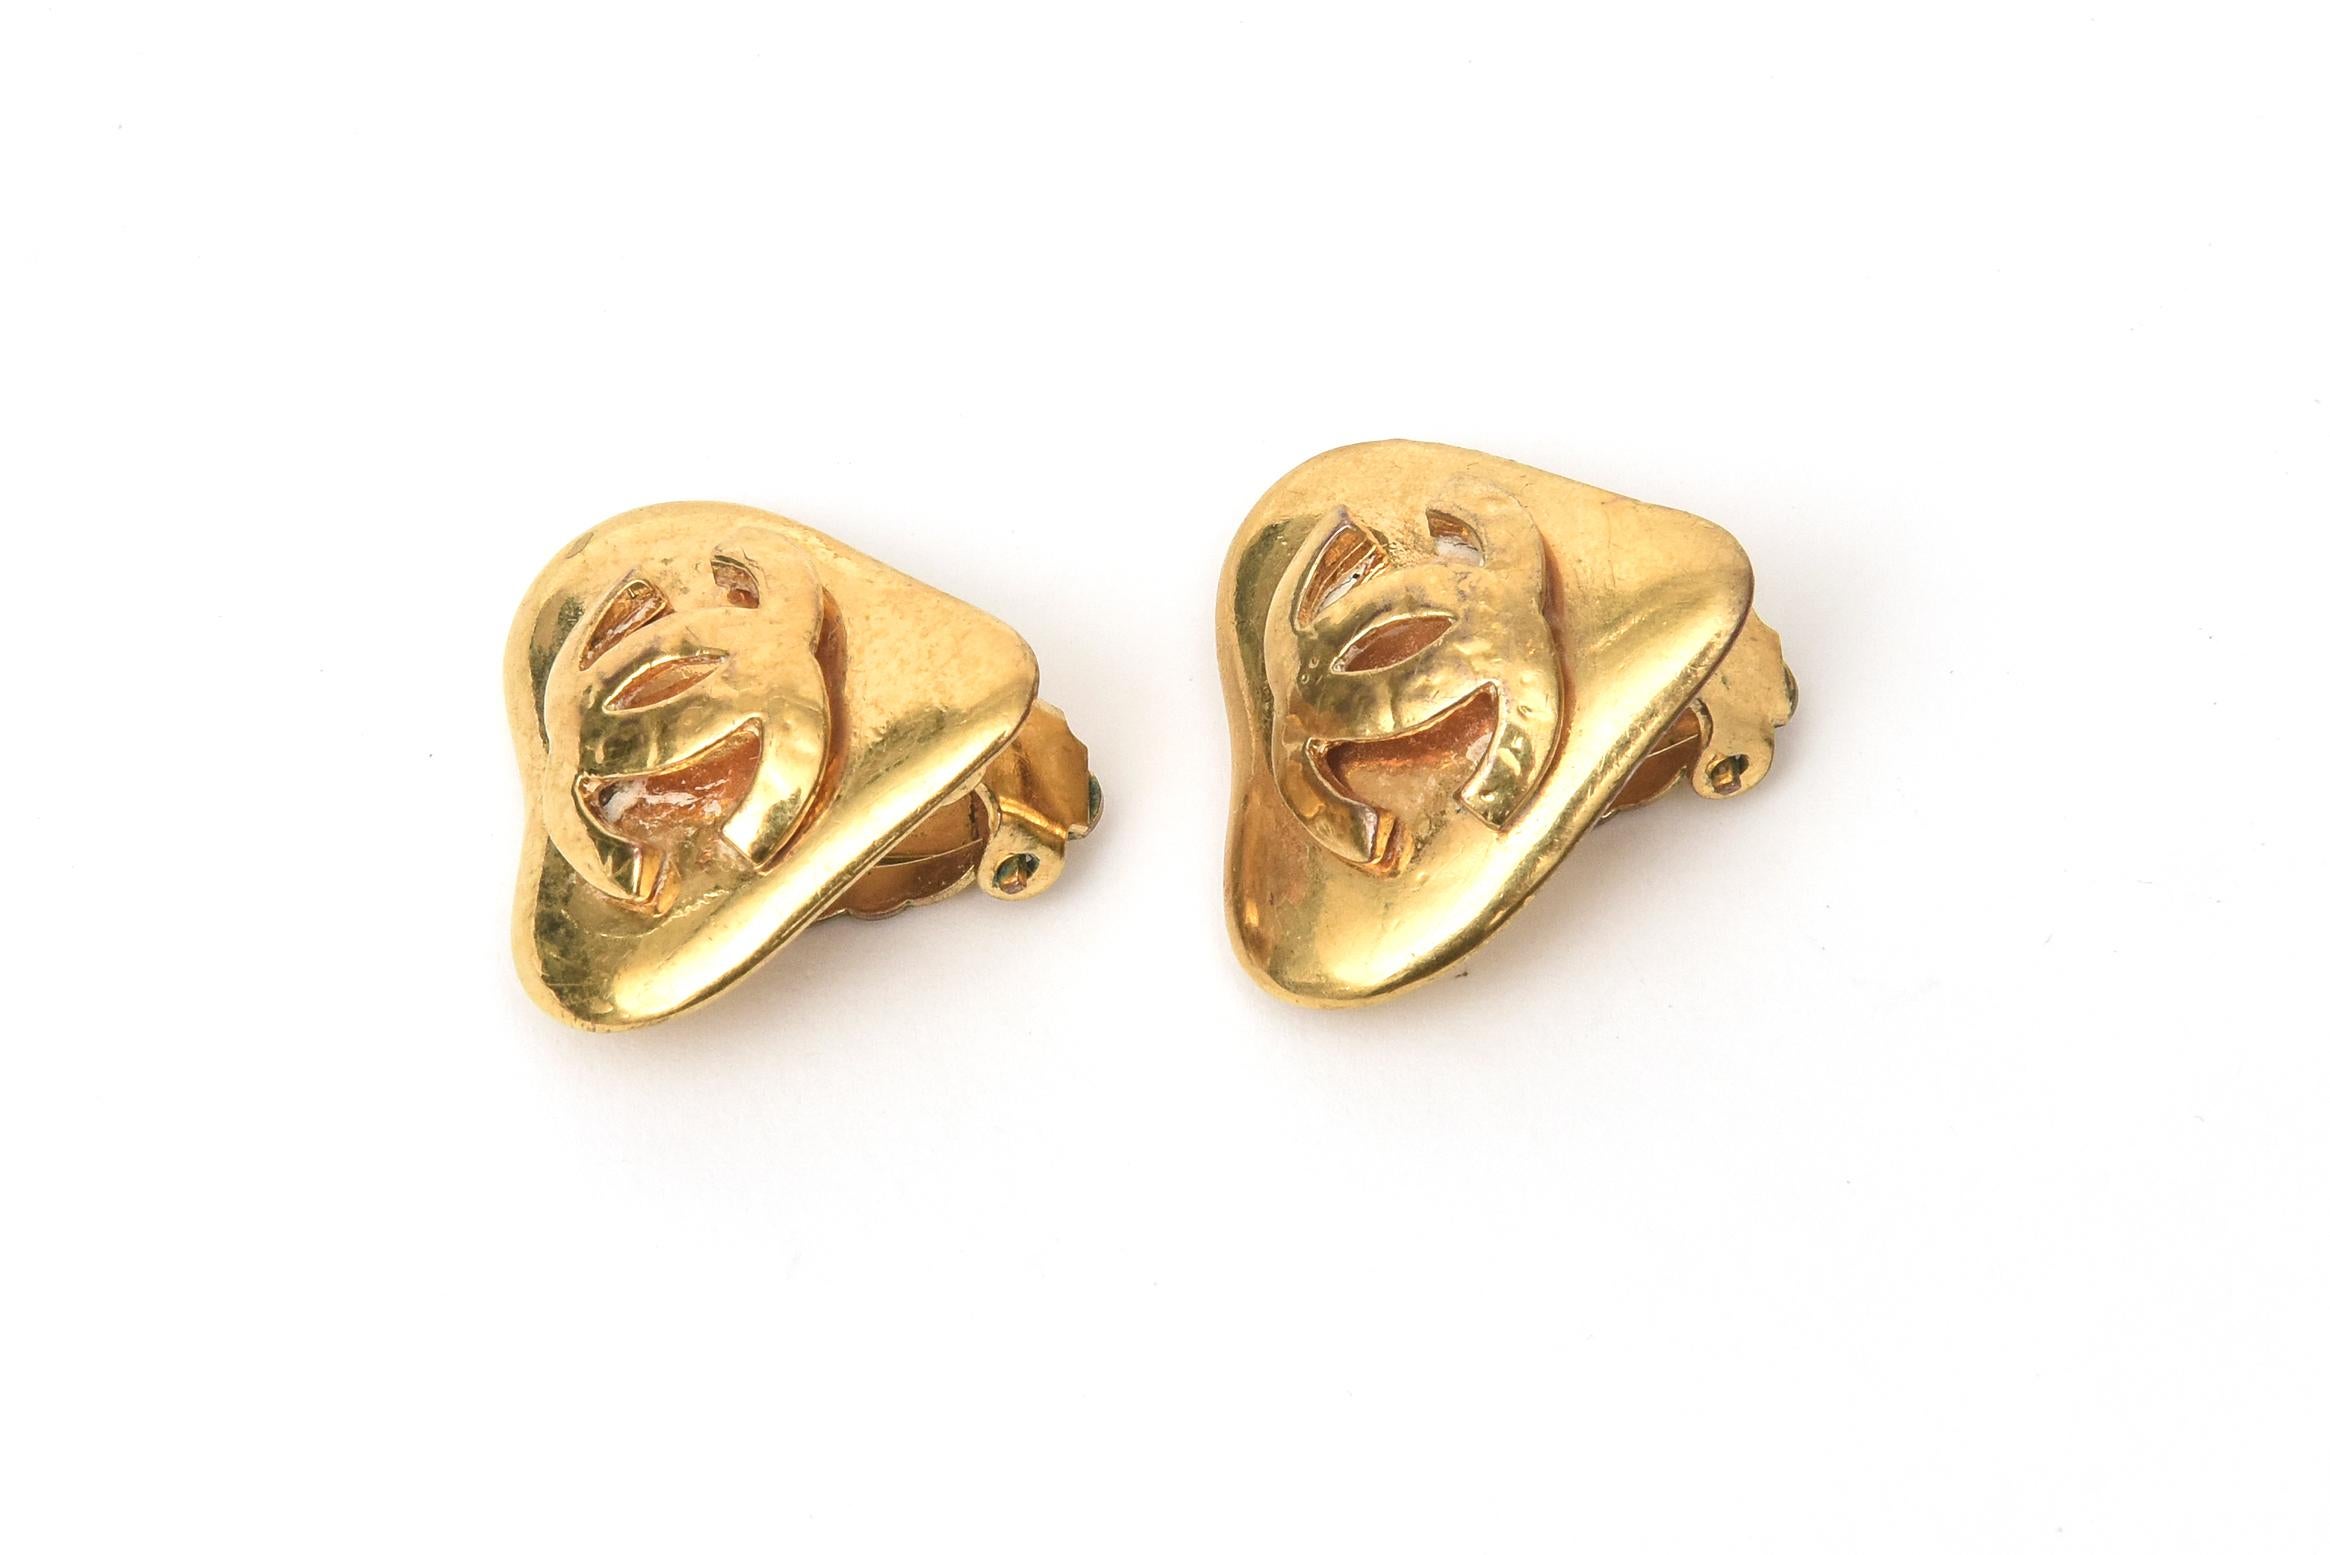 These lovely and charming Chanel CC heart clip on earrings are the smaller size. They were done in 2 sizes. These are more wearable. They are gold plated and from 1986. PLEASE NOTE: THESE WILL BE ON SALE NOW FOR VALENTINE GIFT BUYING.